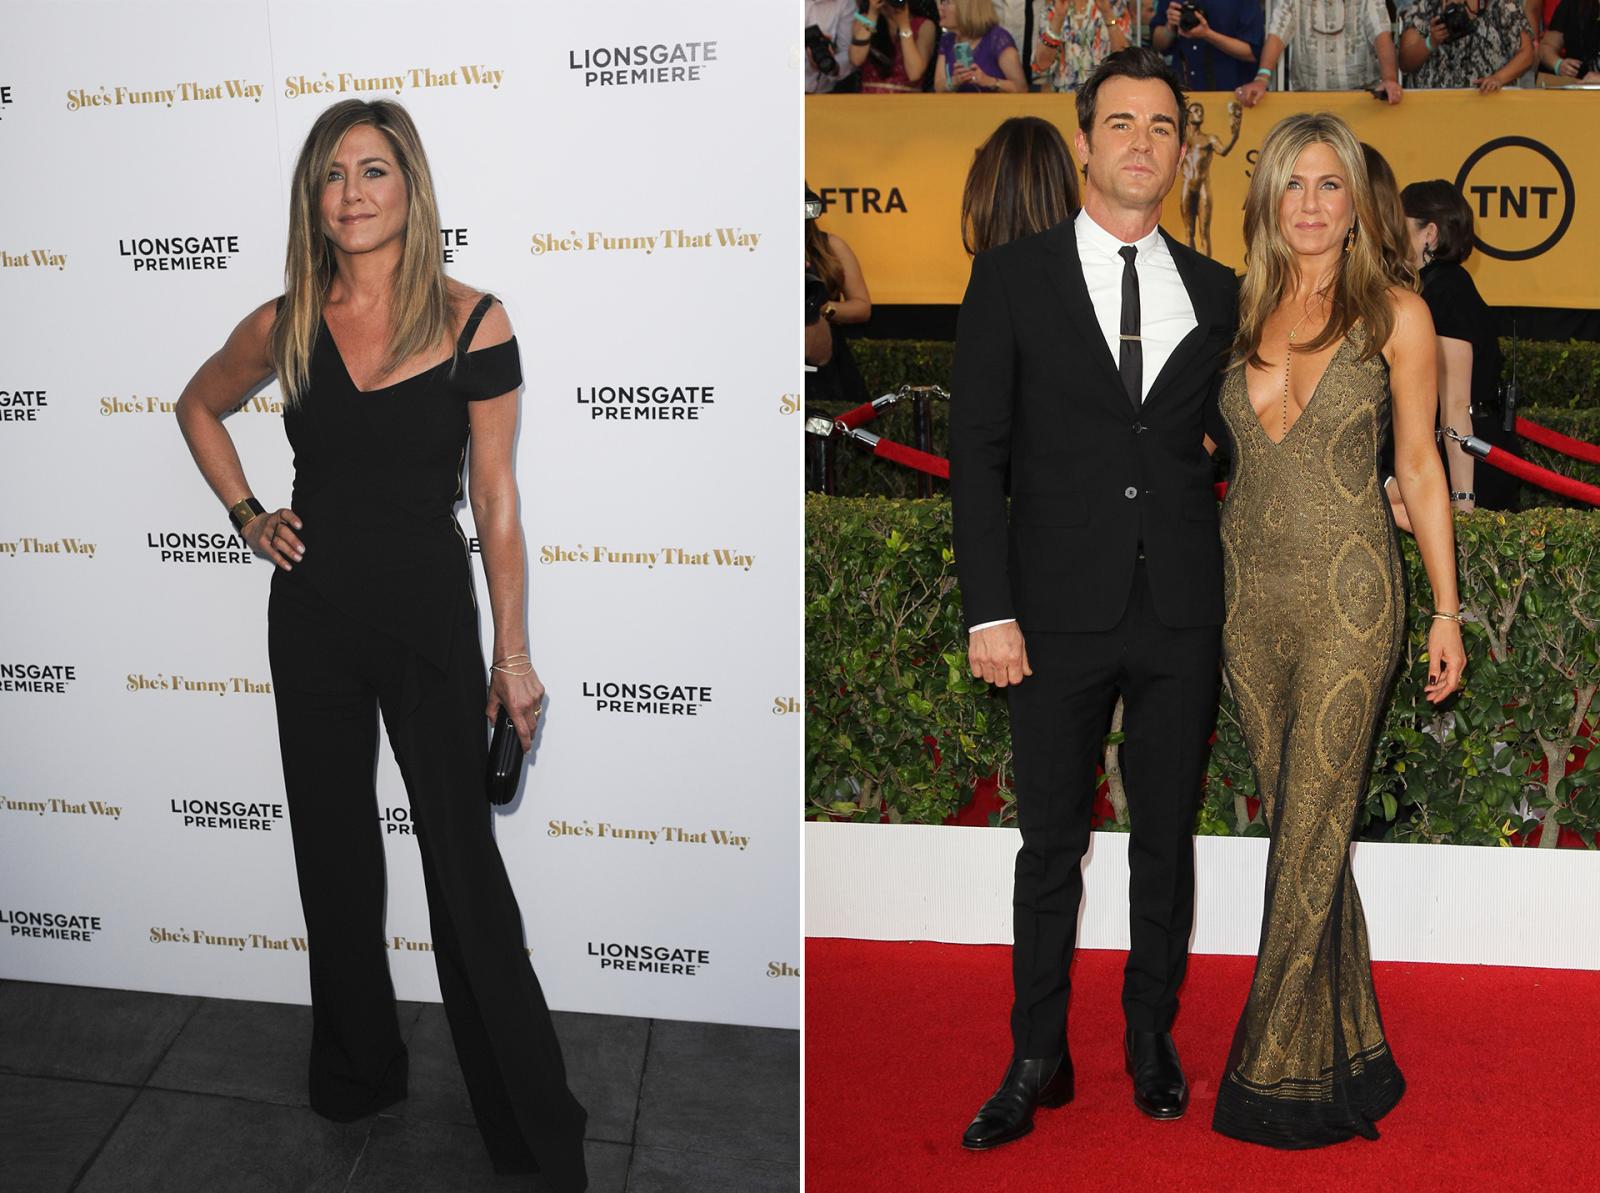 From 'Rachel' Hair to Red Carpet Glam: A Look at Aniston's Style Evolution - image 5